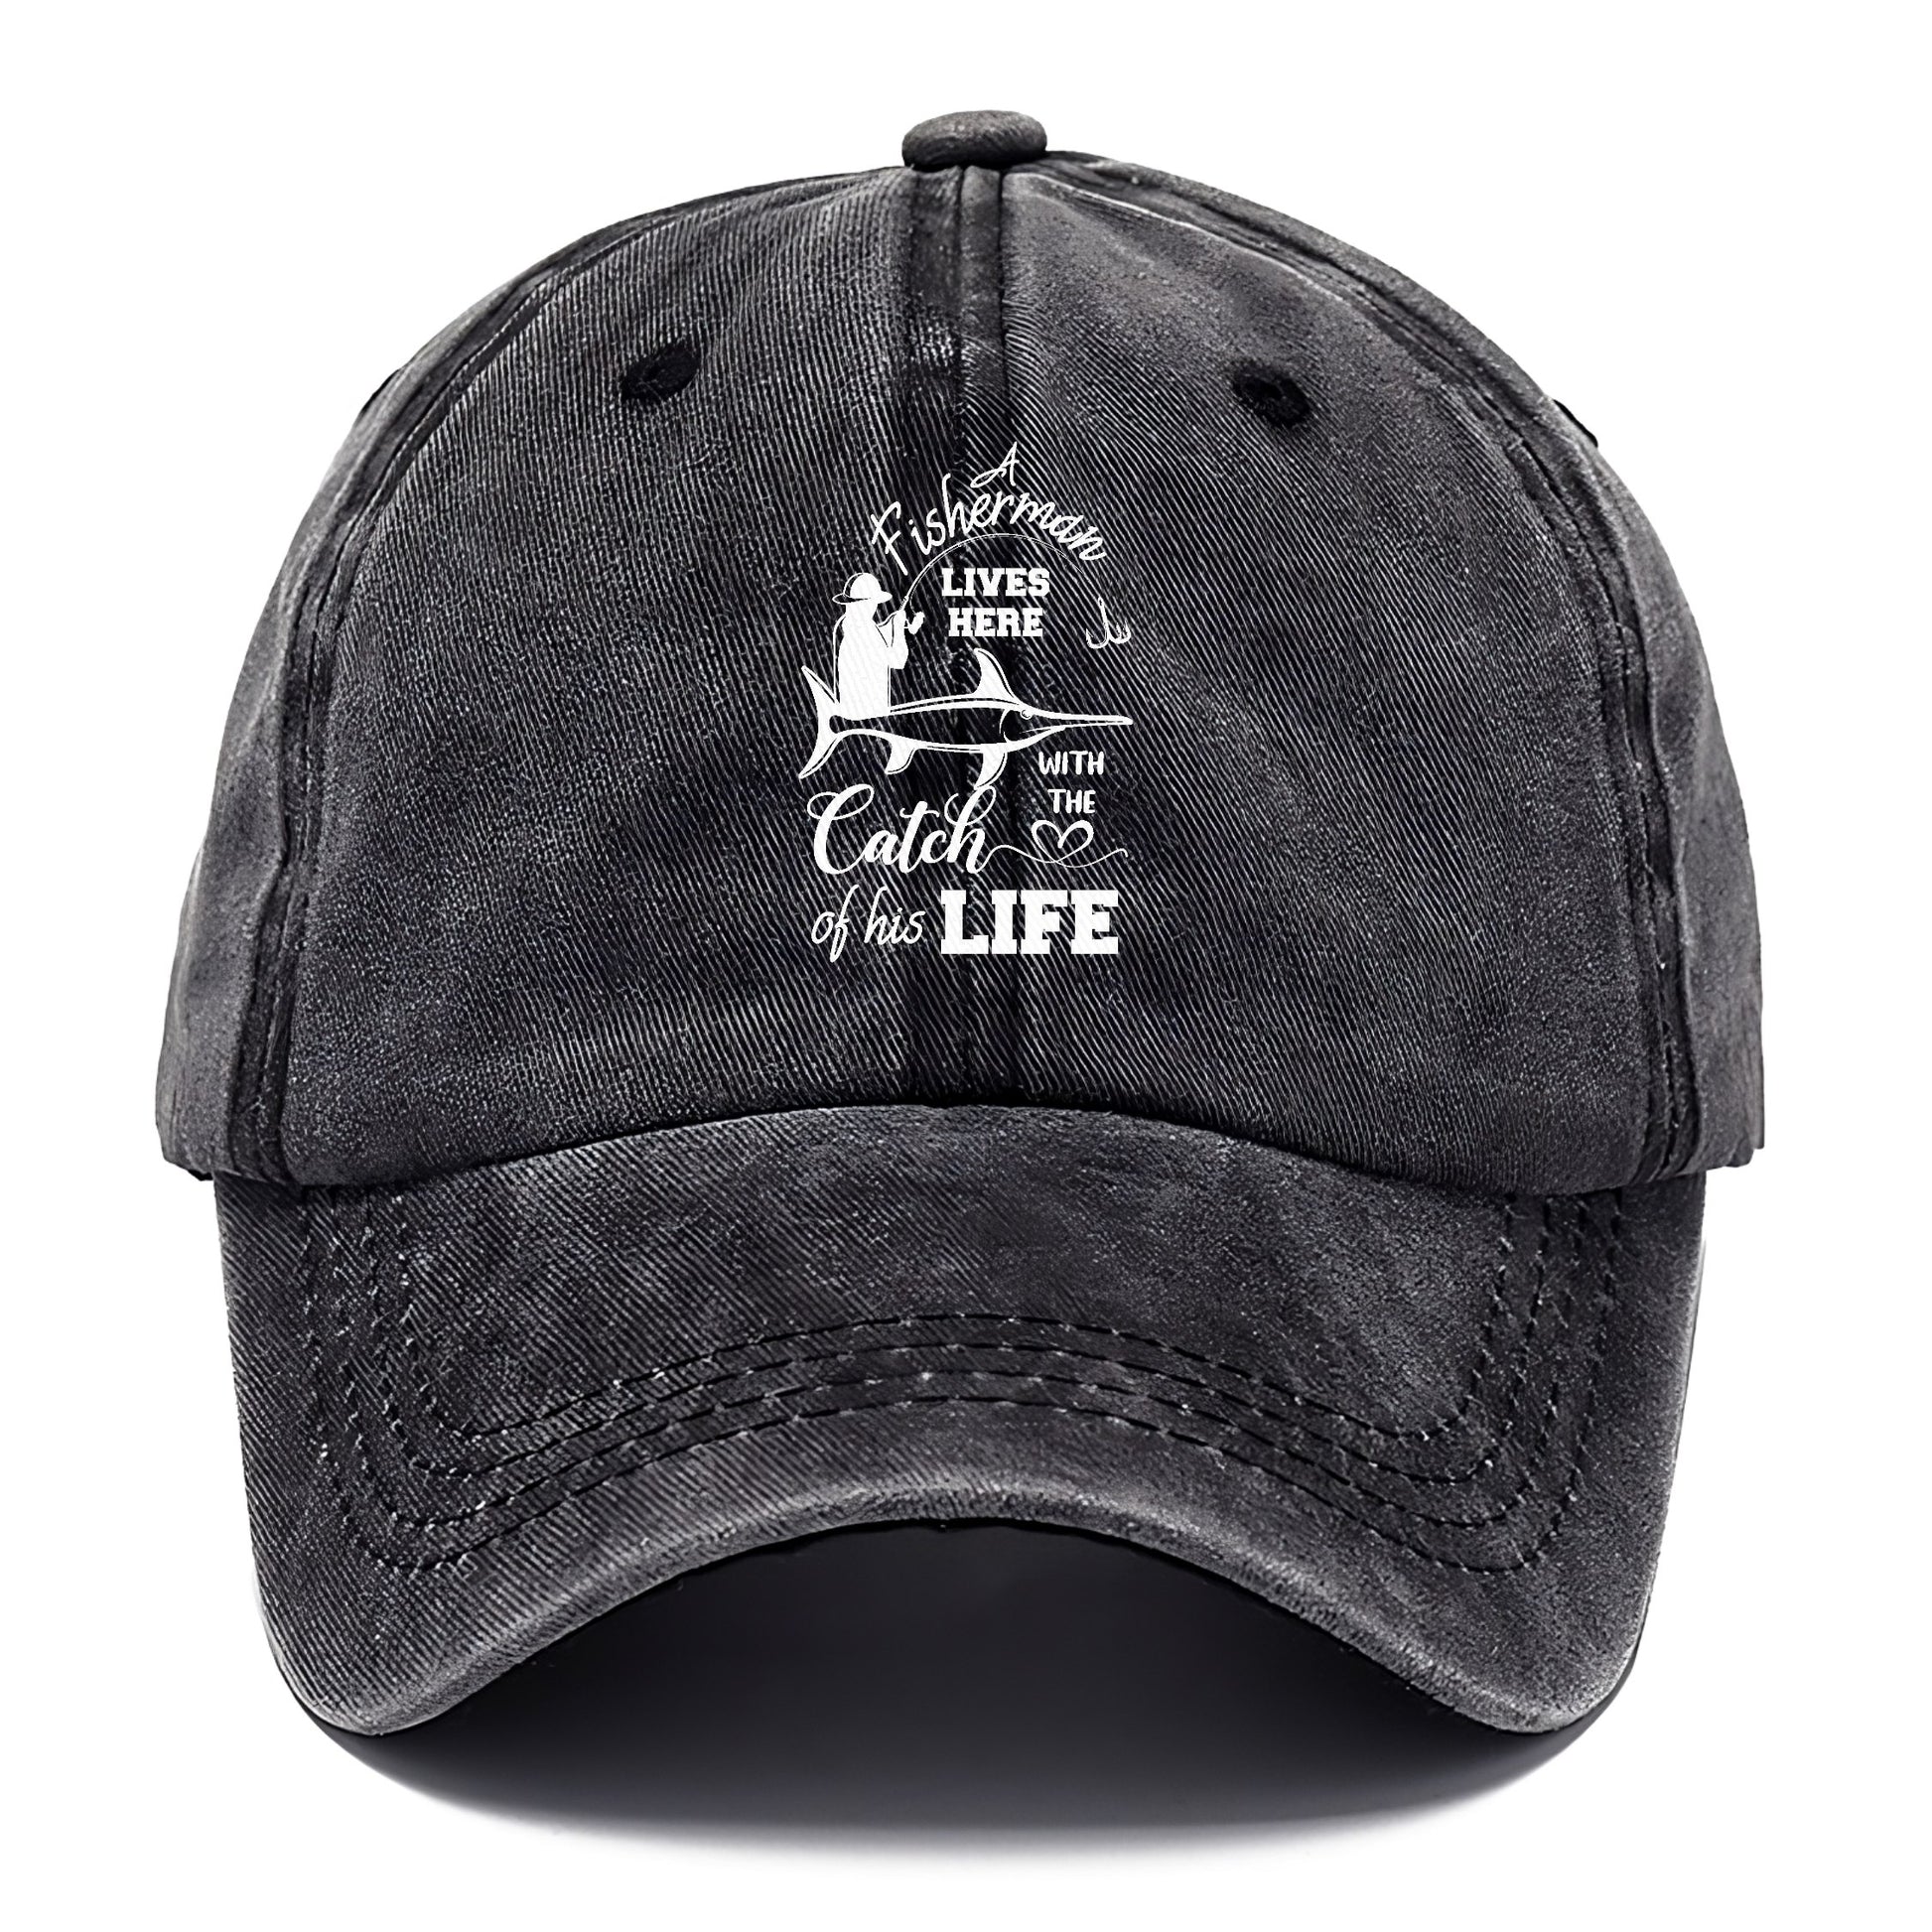 fisherman lives here with the catch of his life Hat